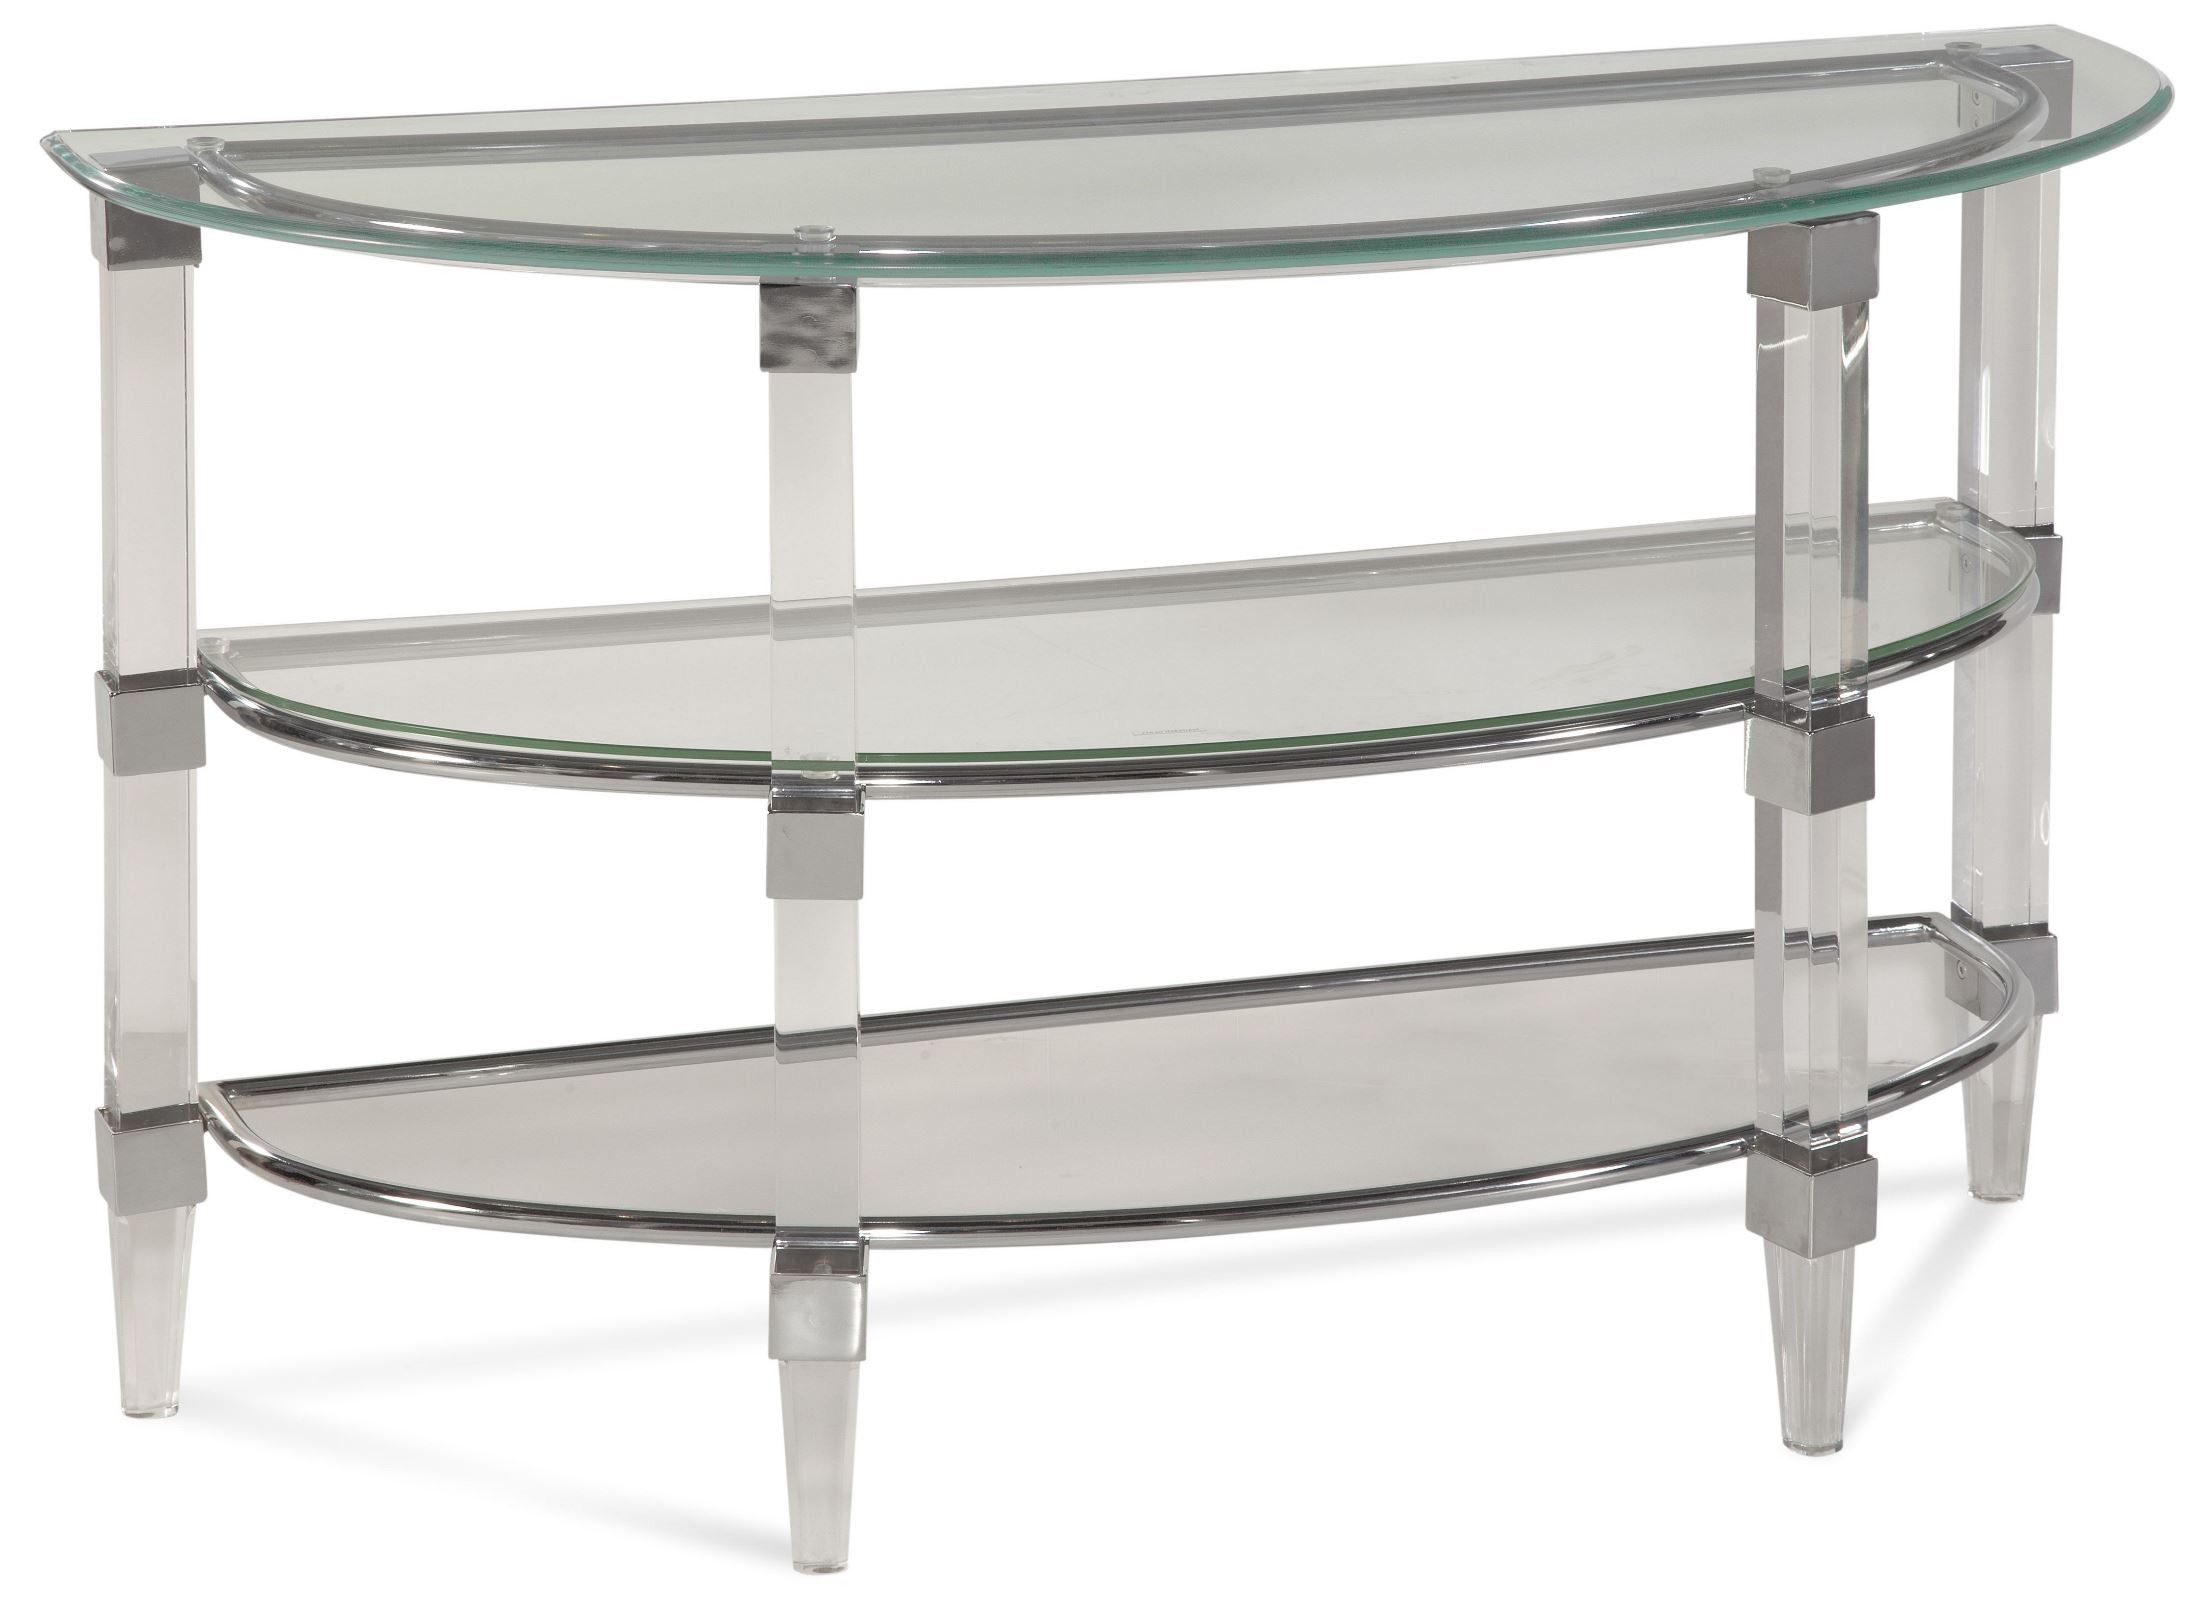 Cristal Acrylic And Chrome Console Table From Bassett Mirror | Coleman Throughout Acrylic Console Tables (Gallery 19 of 20)